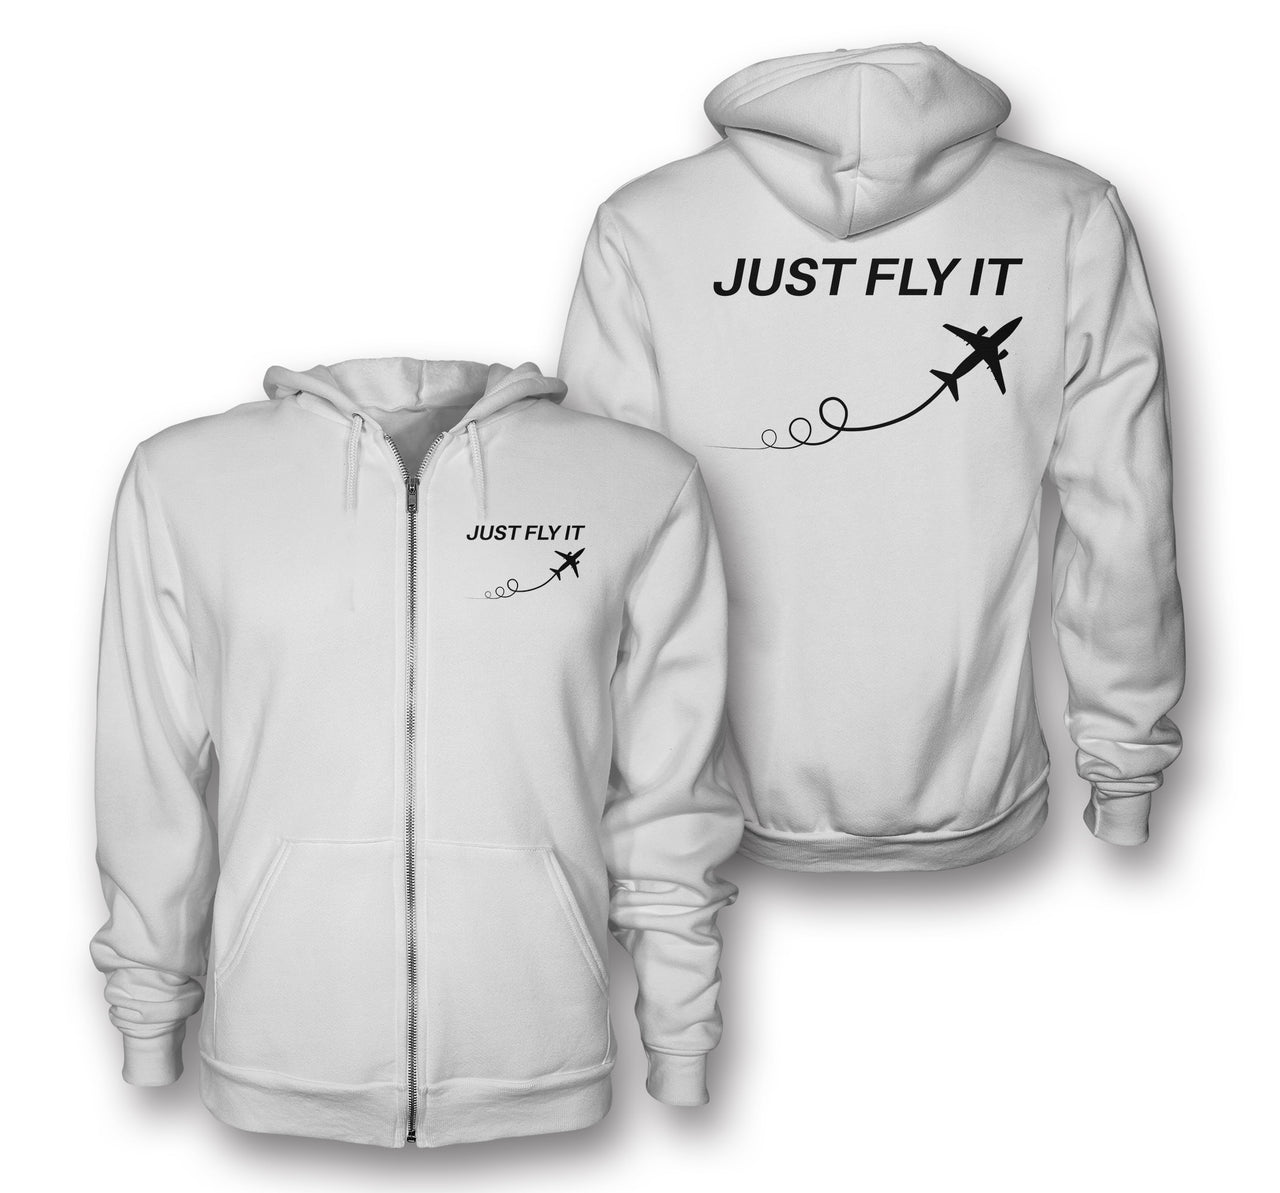 Just Fly It Designed Zipped Hoodies